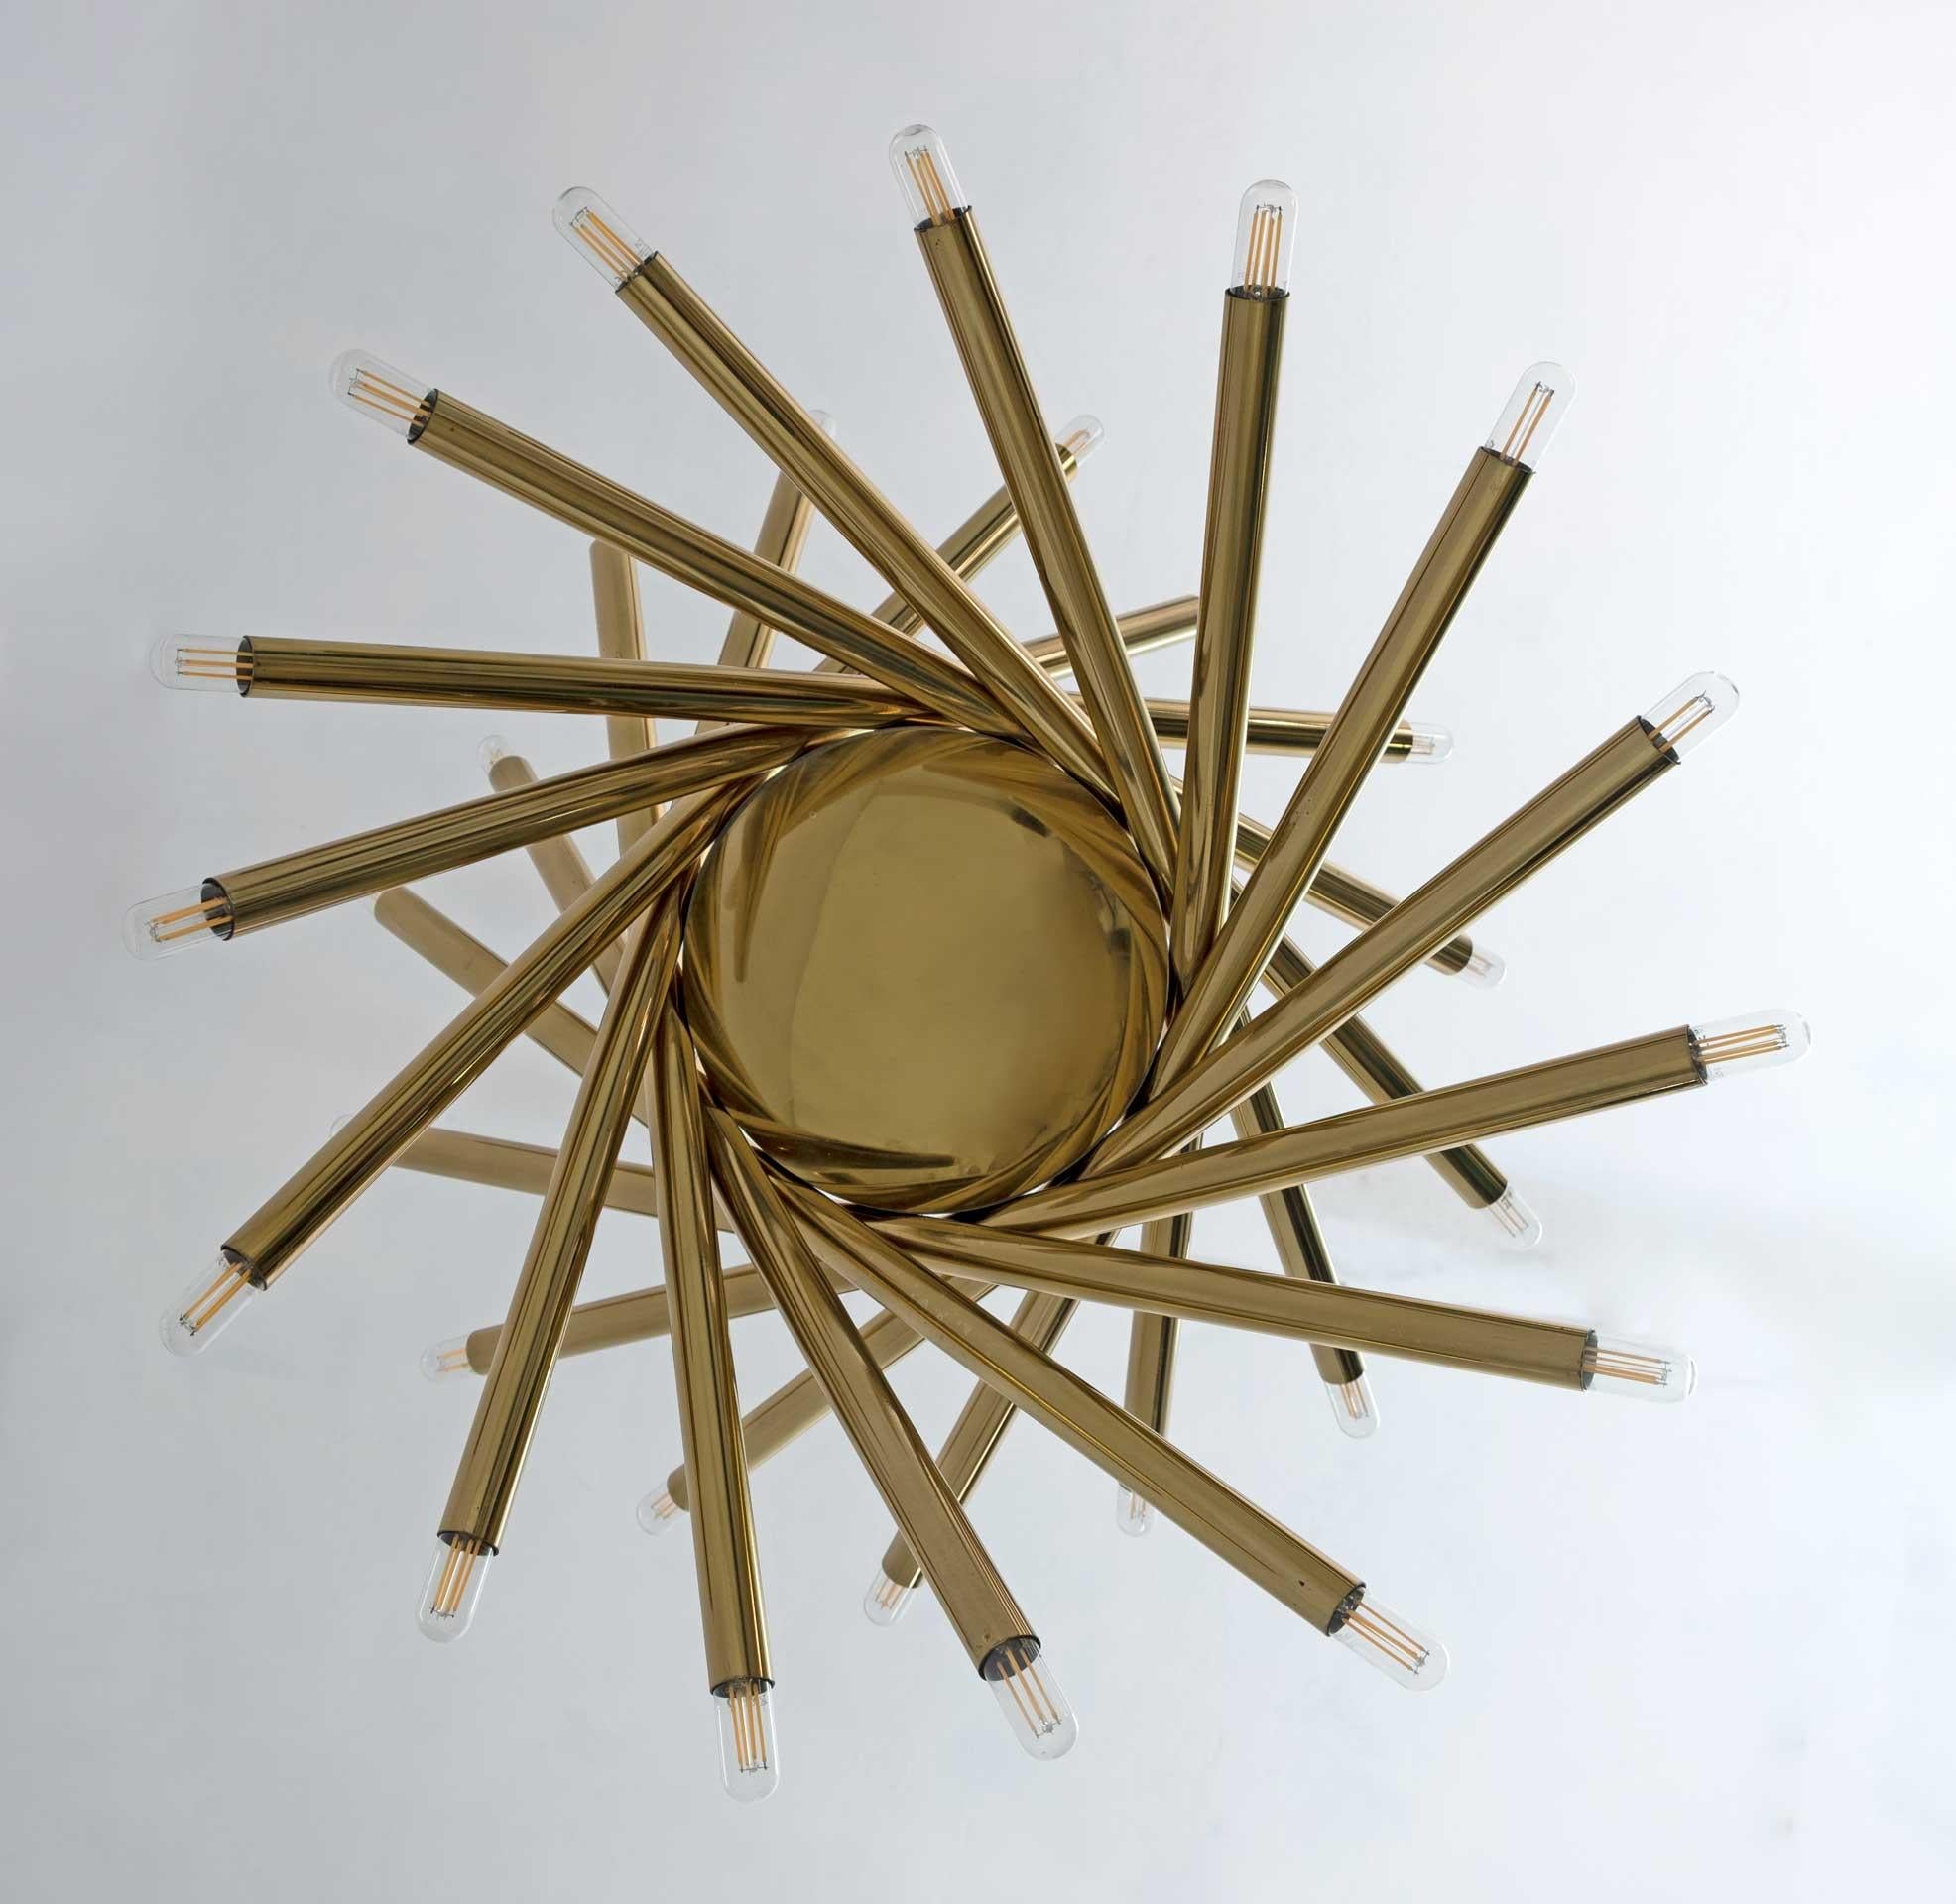 Imposing brass chandelier by Stilnovo, Milan, 1960s. Thirty bulbs with E14 socket, with the reducers we can transform it into E12, USA socket. The last photo shows a smaller version of this fixture in Tamara Mellon's attic.
This version is very